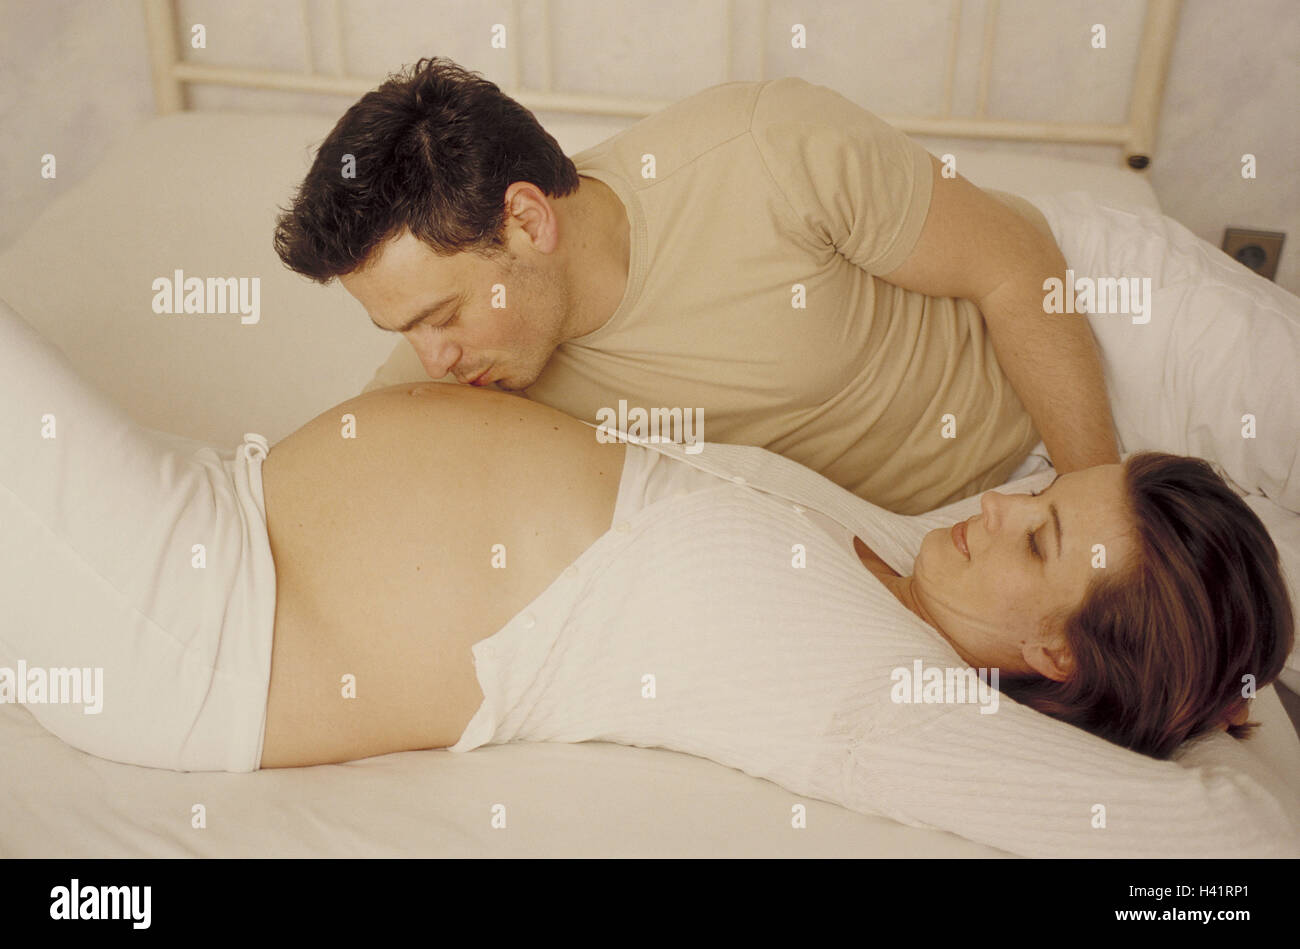 Bed, couple, lie, kiss woman, pregnant, man, baby abdomen, partner, Gestation, gestation, pregnant, gestation, abdomen, kiss, tenderness, feeling, affection, love, luck, emotion, body feeling, prejoy, partnership, cohesion, child wish, family planning, po Stock Photo